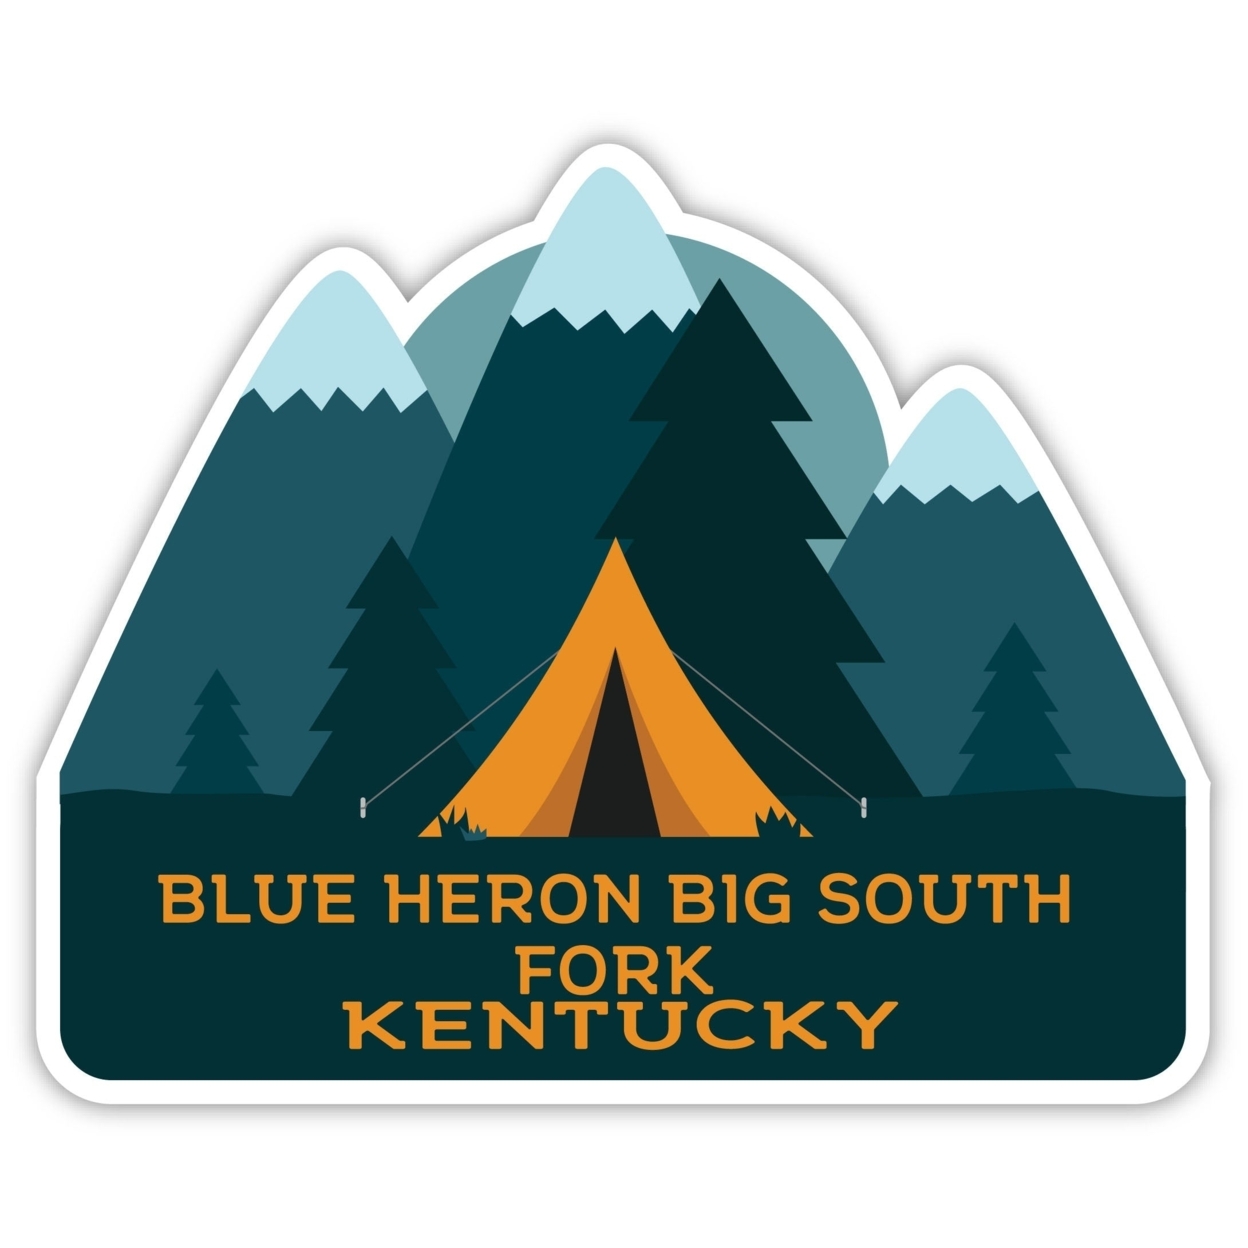 Blue Heron Big South Fork Kentucky Souvenir Decorative Stickers (Choose Theme And Size) - 4-Pack, 2-Inch, Tent